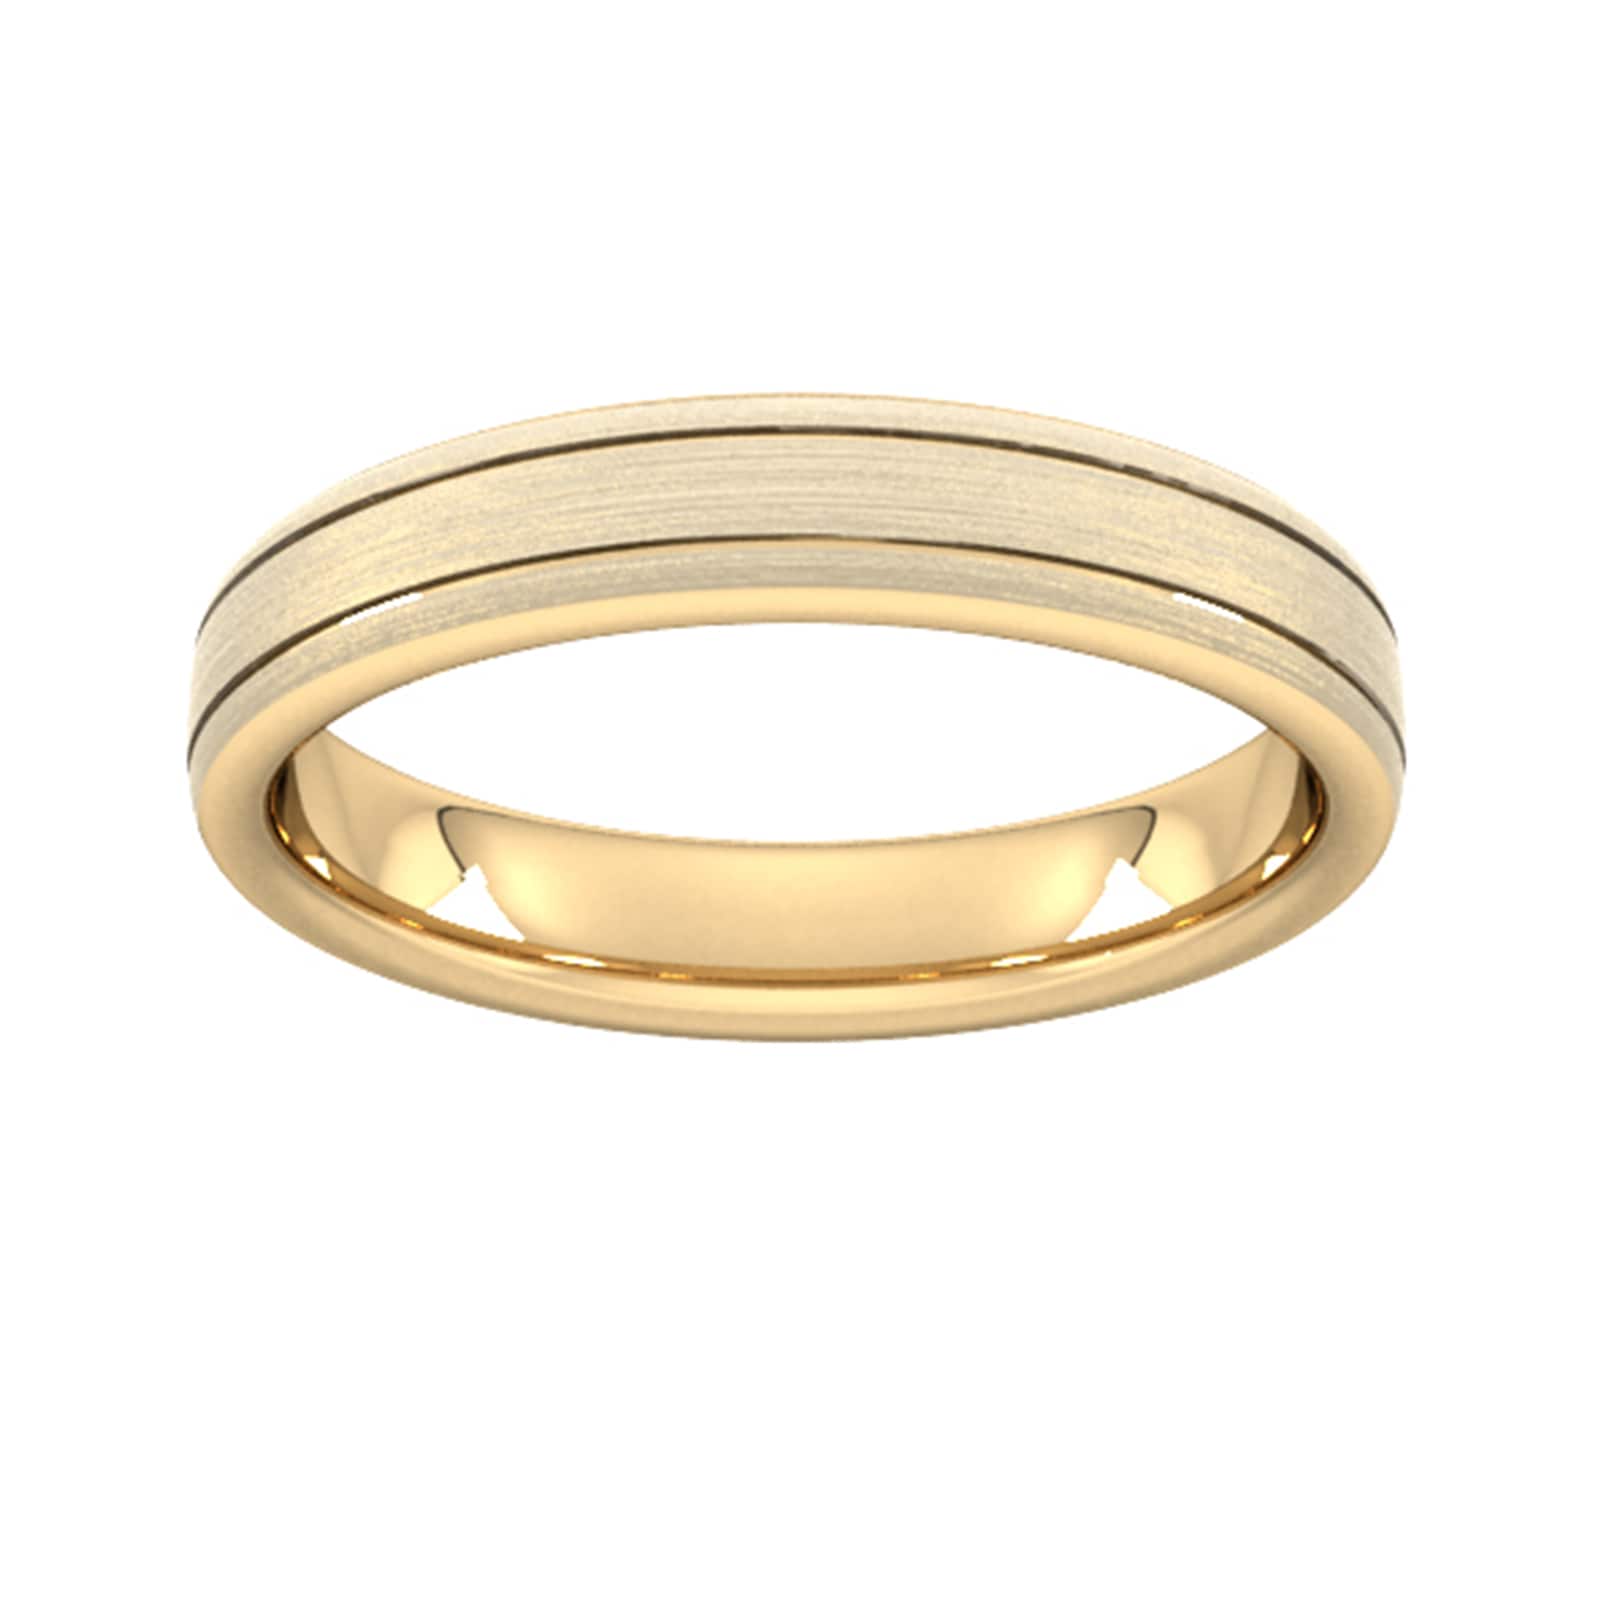 4mm D Shape Standard Matt Finish With Double Grooves Wedding Ring In 9 Carat Yellow Gold - Ring Size U